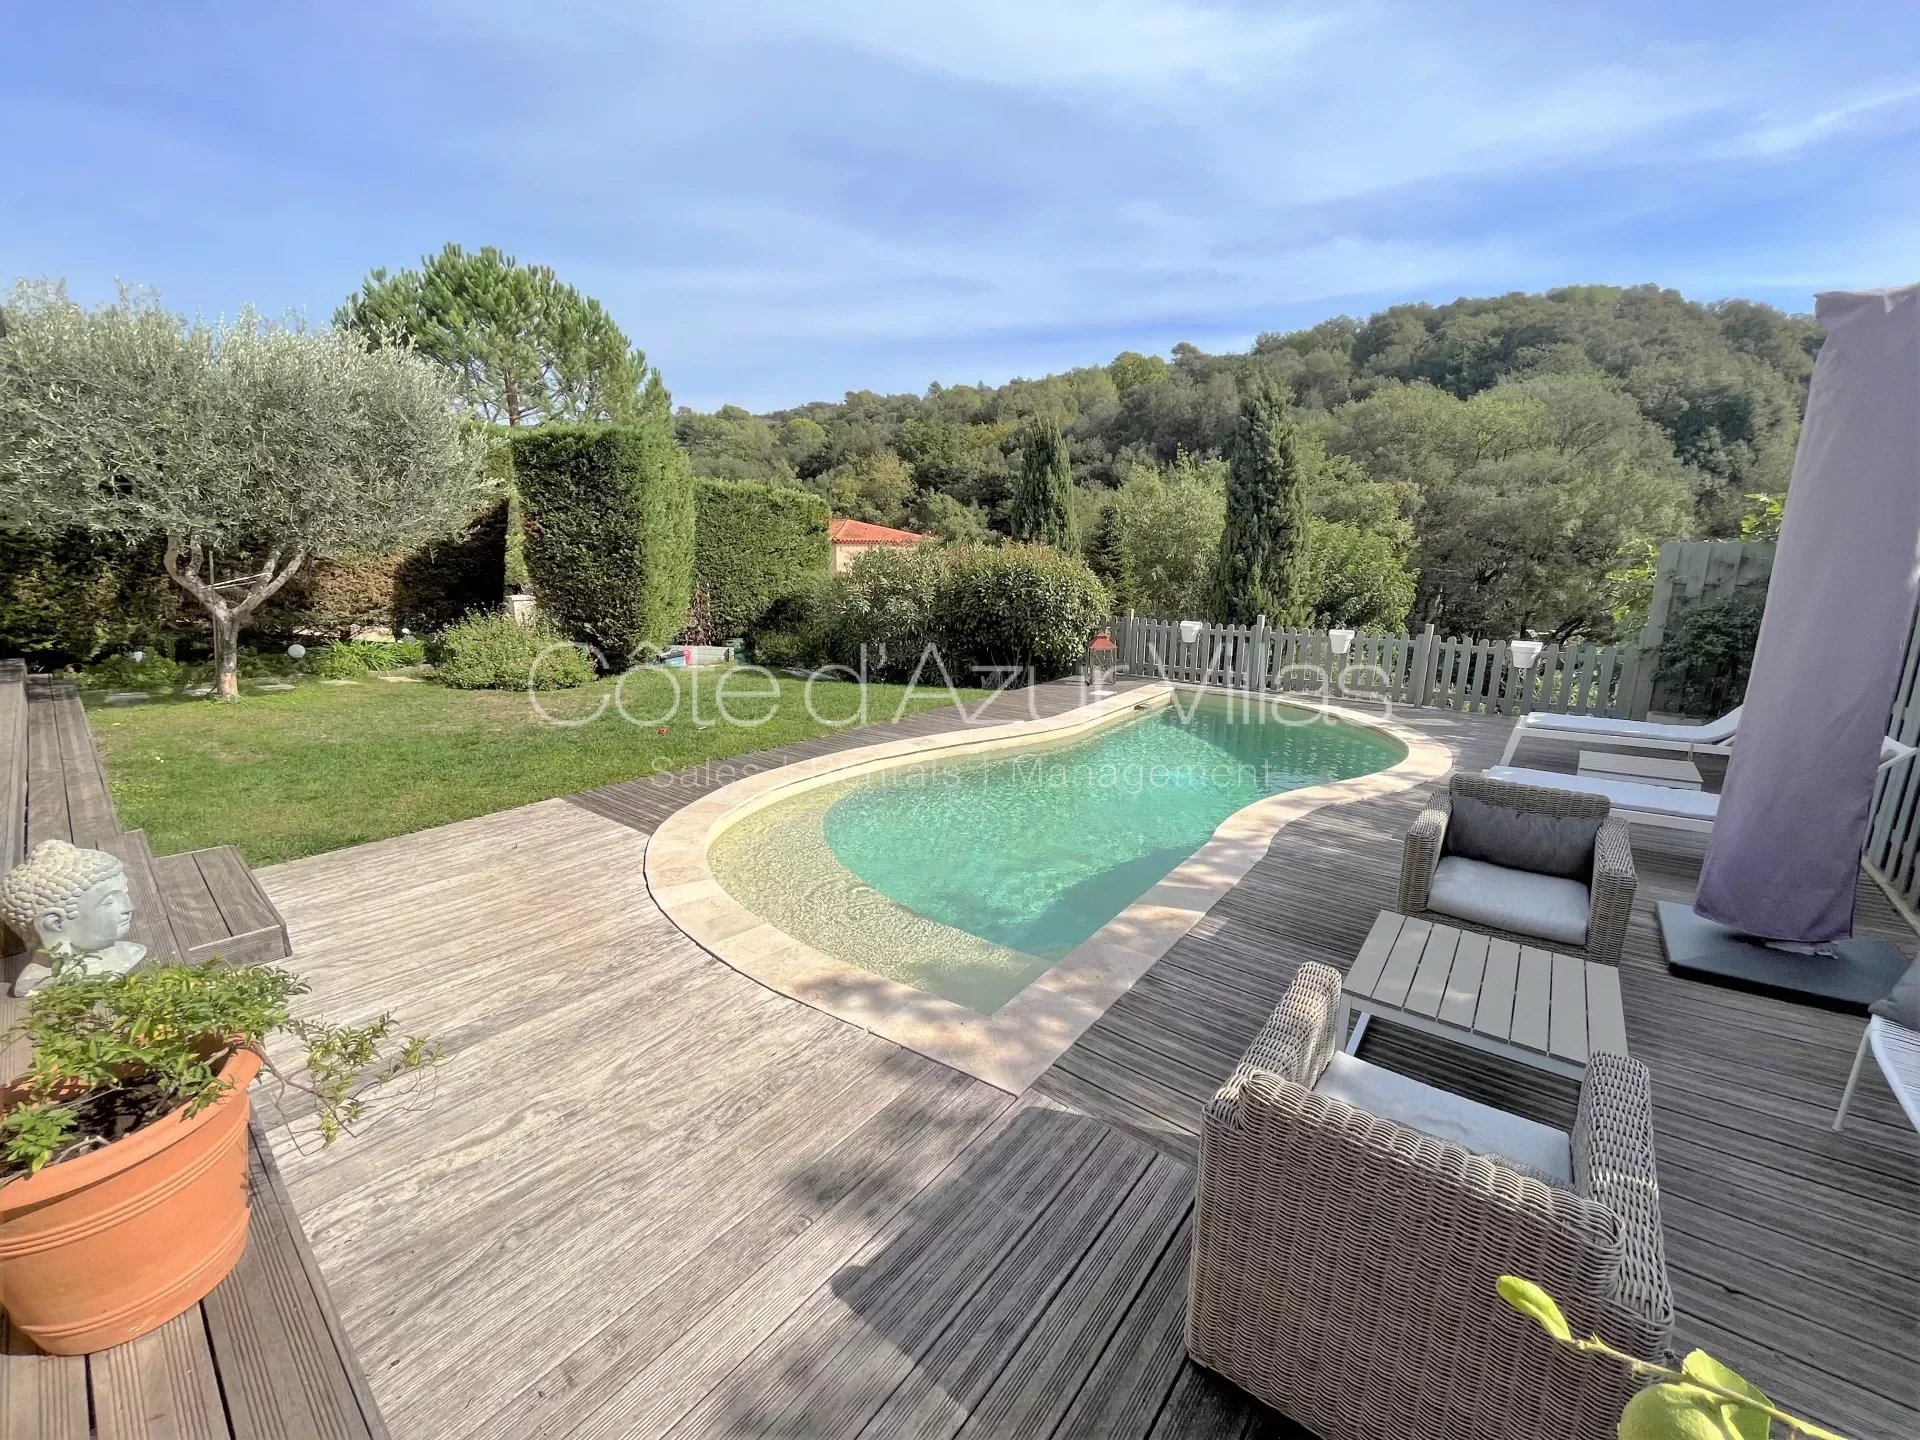 Biot - 3 bedroom detached house in a domain in a quiet area